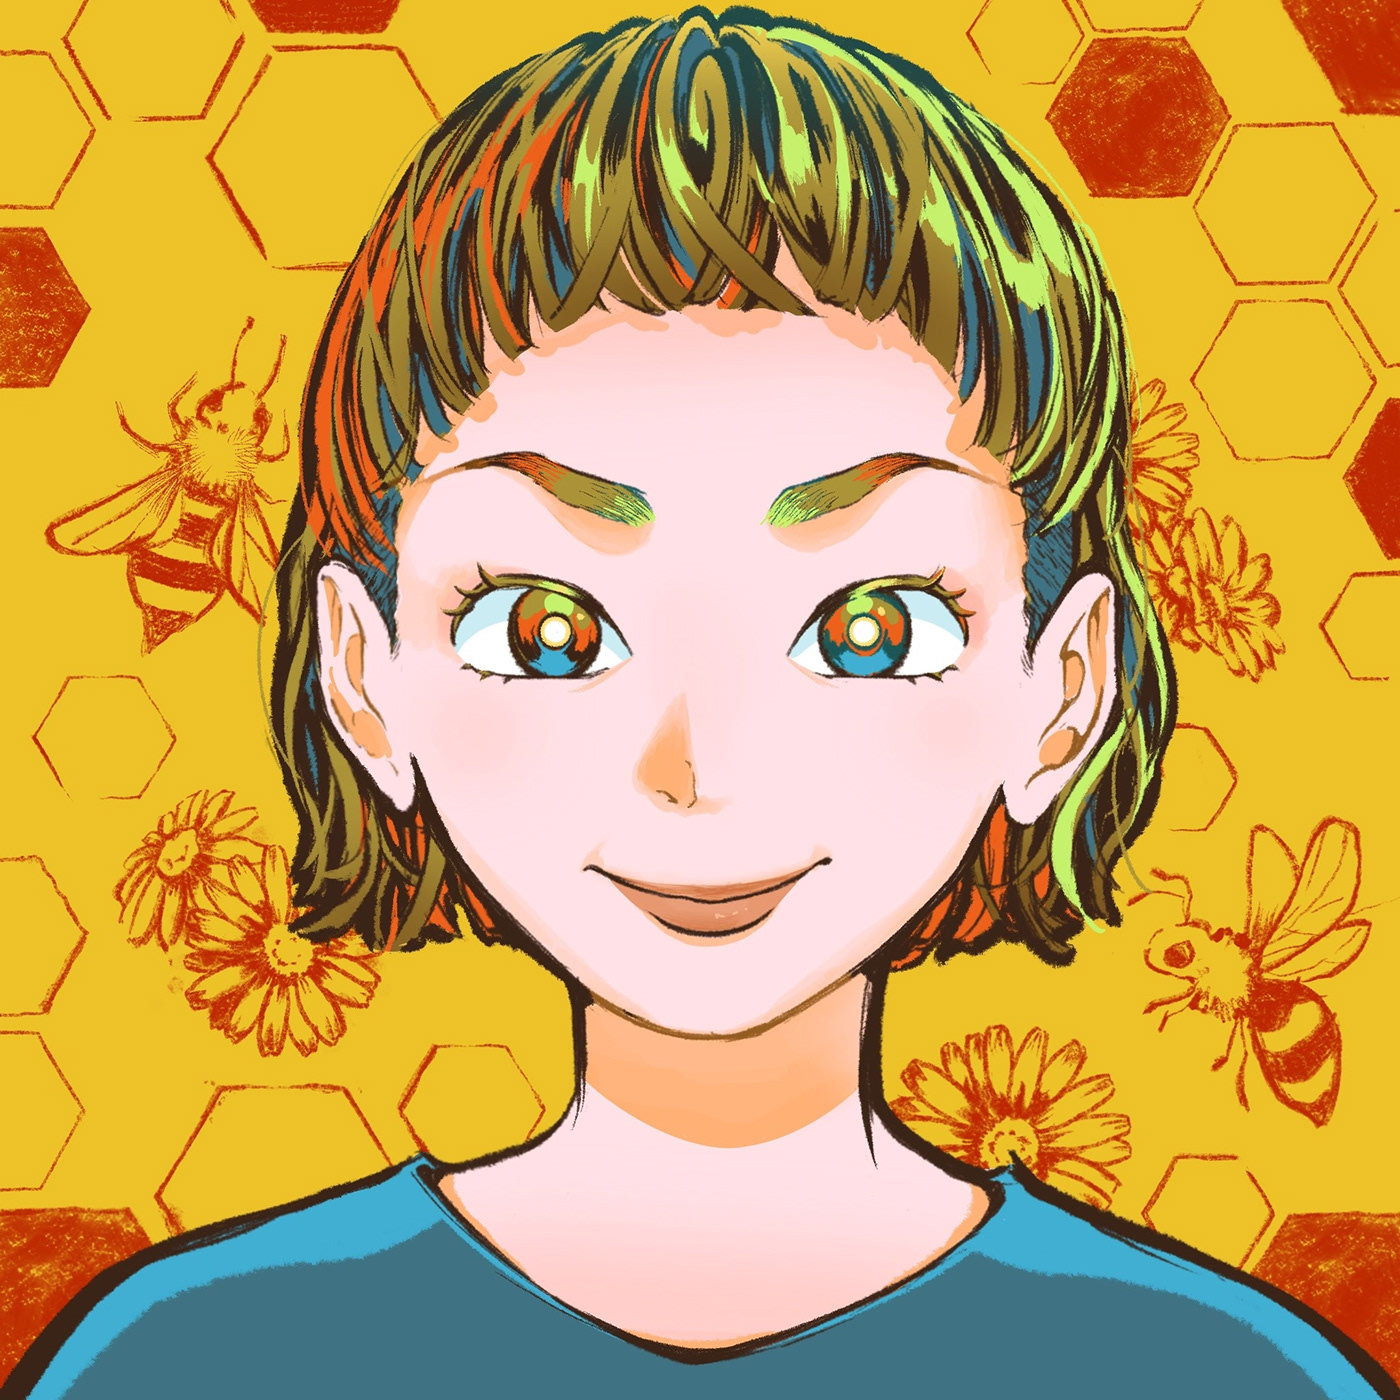 Beekeeper beekeeping honey agriculture organic farming ILLUSTRATION  art Drawing  creative design visual art hand-drawn Digital Art  Bee Care Beekeeping Work bees Bees' Home nature enthusiast self-sufficiency Vegetables and Honey